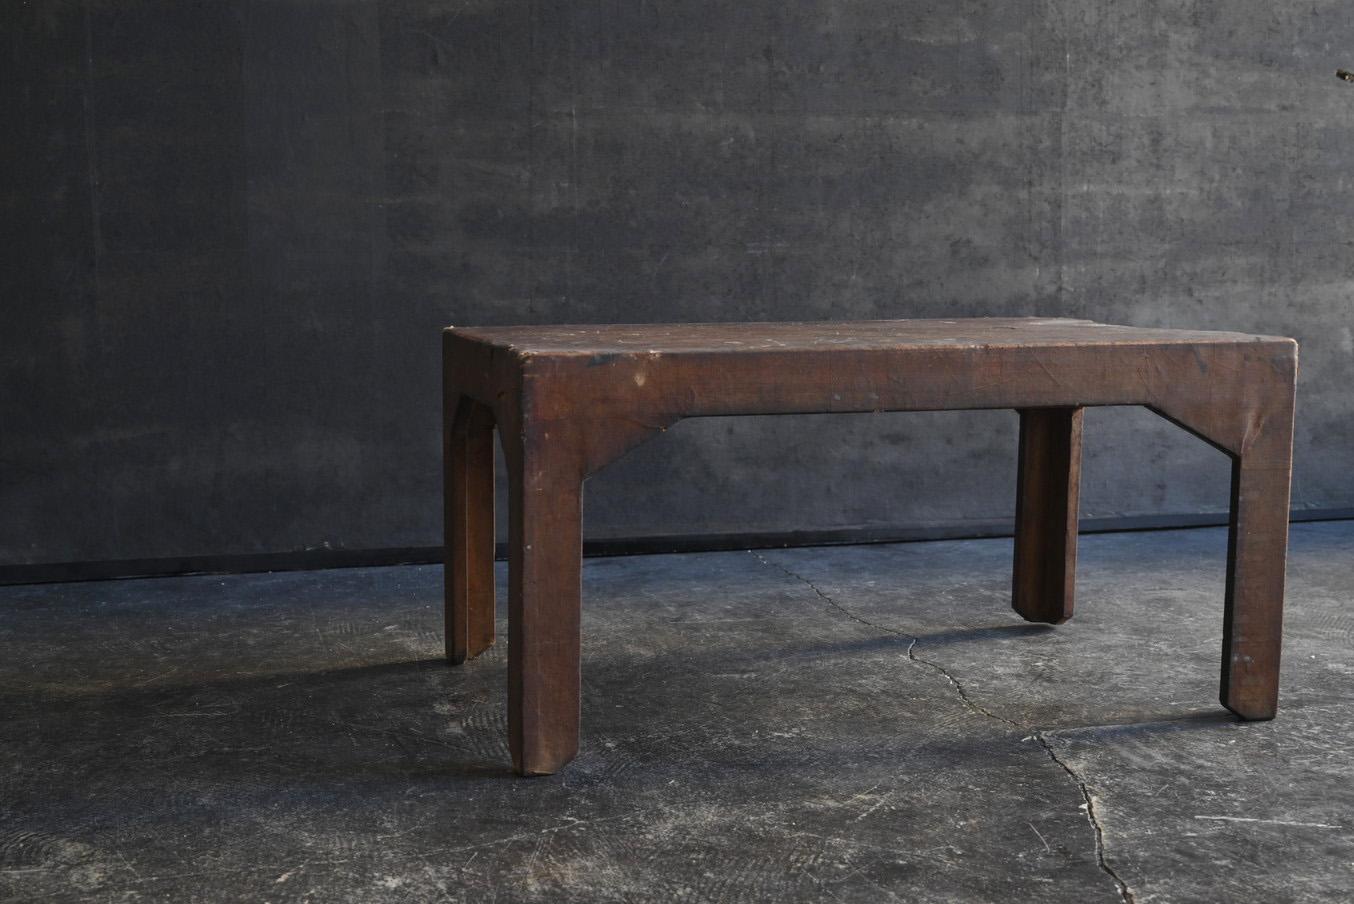 I would like to introduce you to a rare Japanese low table.
This is a small wooden table made from the Meiji period to the Taisho period (1868-1920).
The wood material is cedar.
This is finished by pasting washi paper on top and applying persimmon